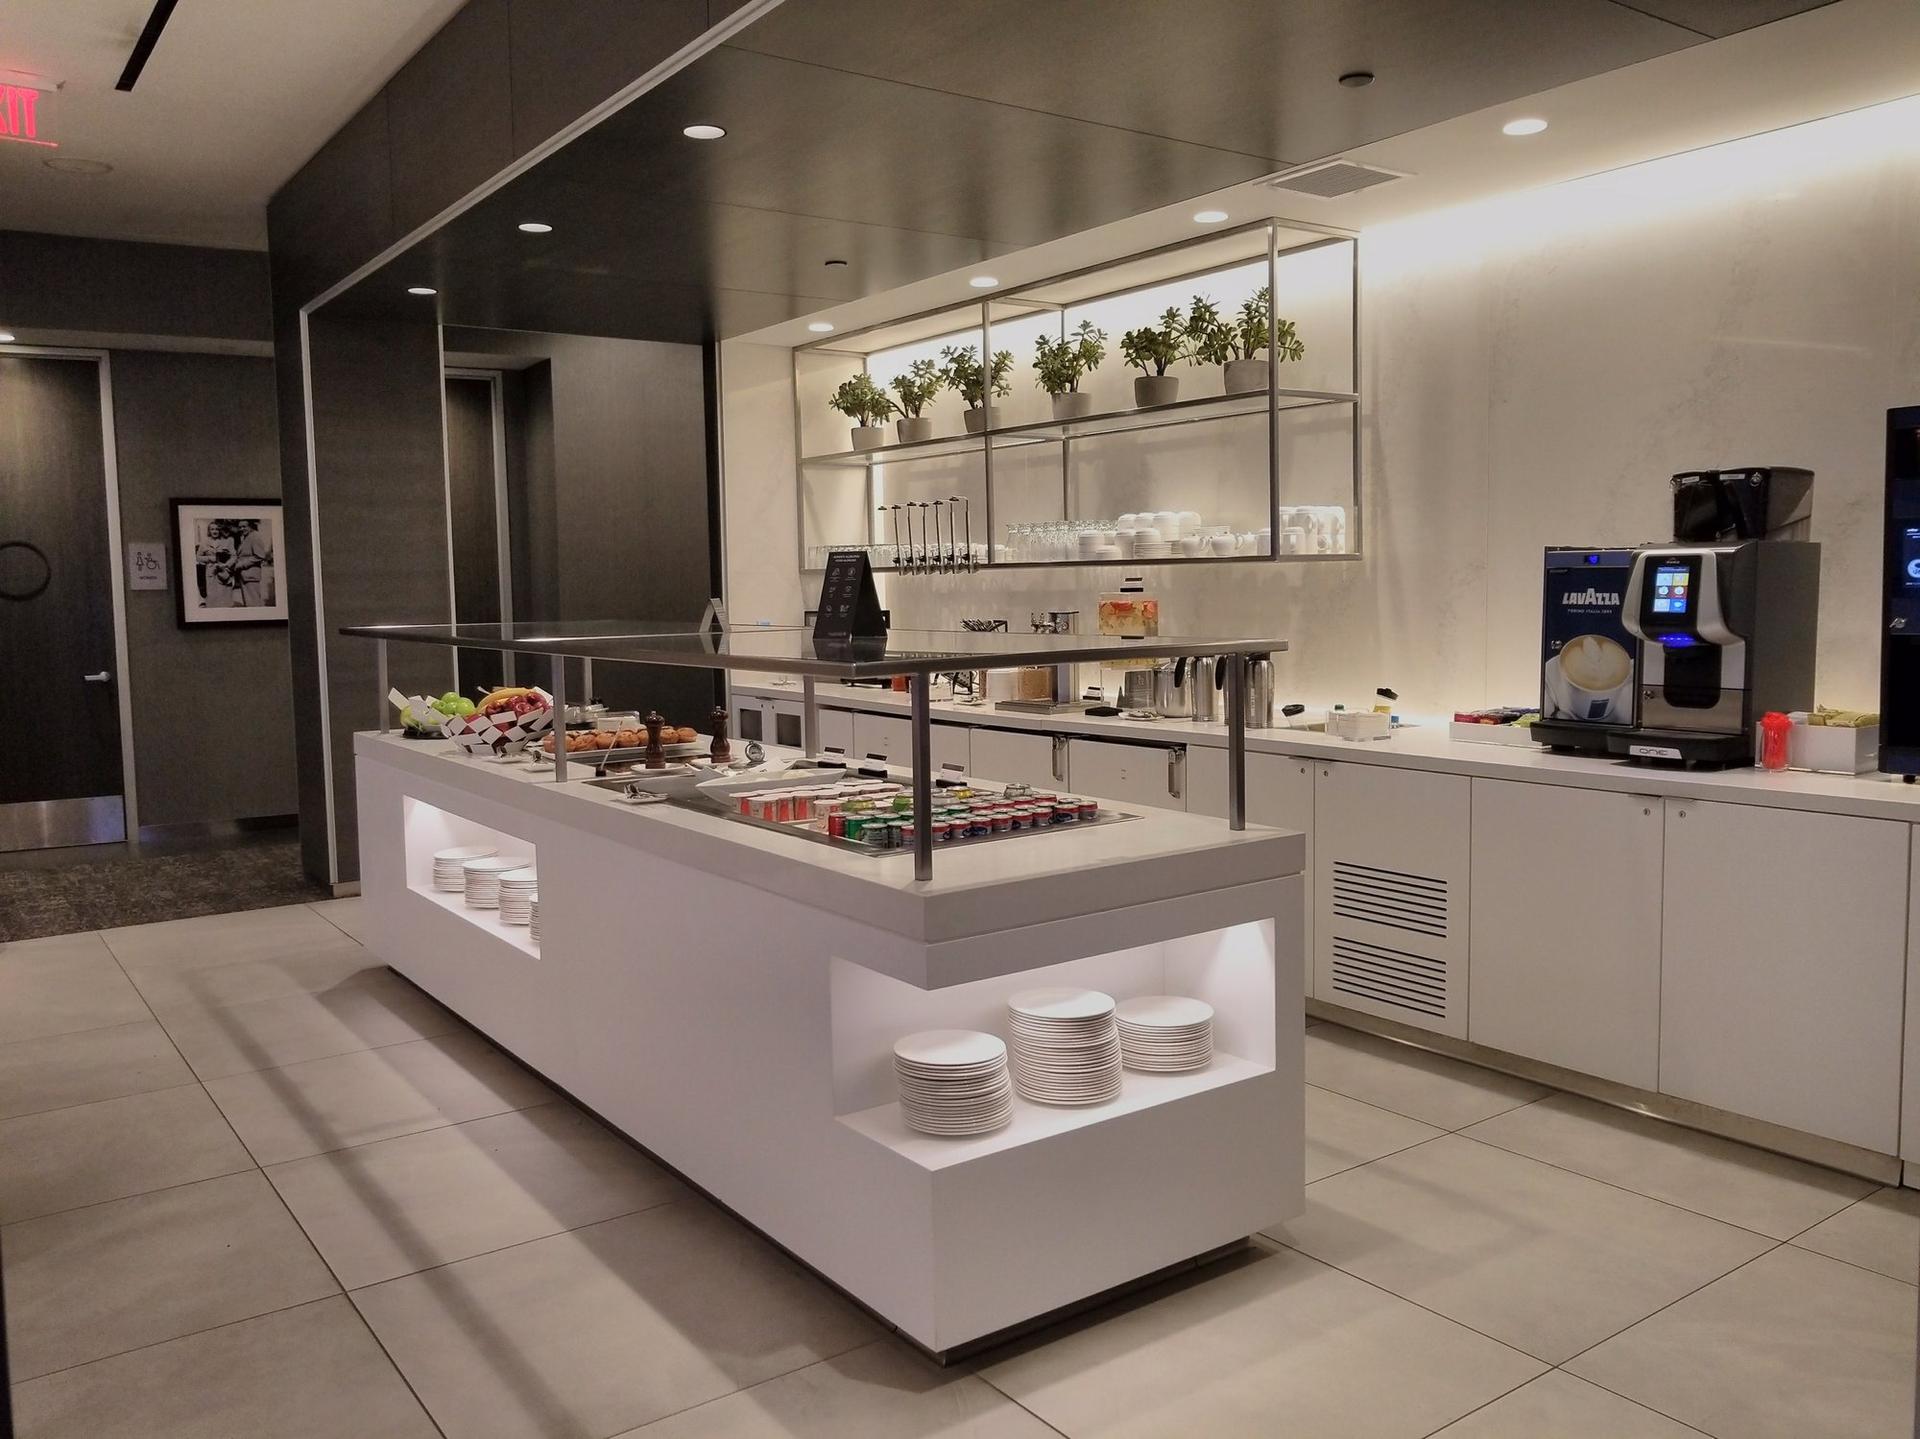 Air Canada Maple Leaf Lounge image 9 of 24